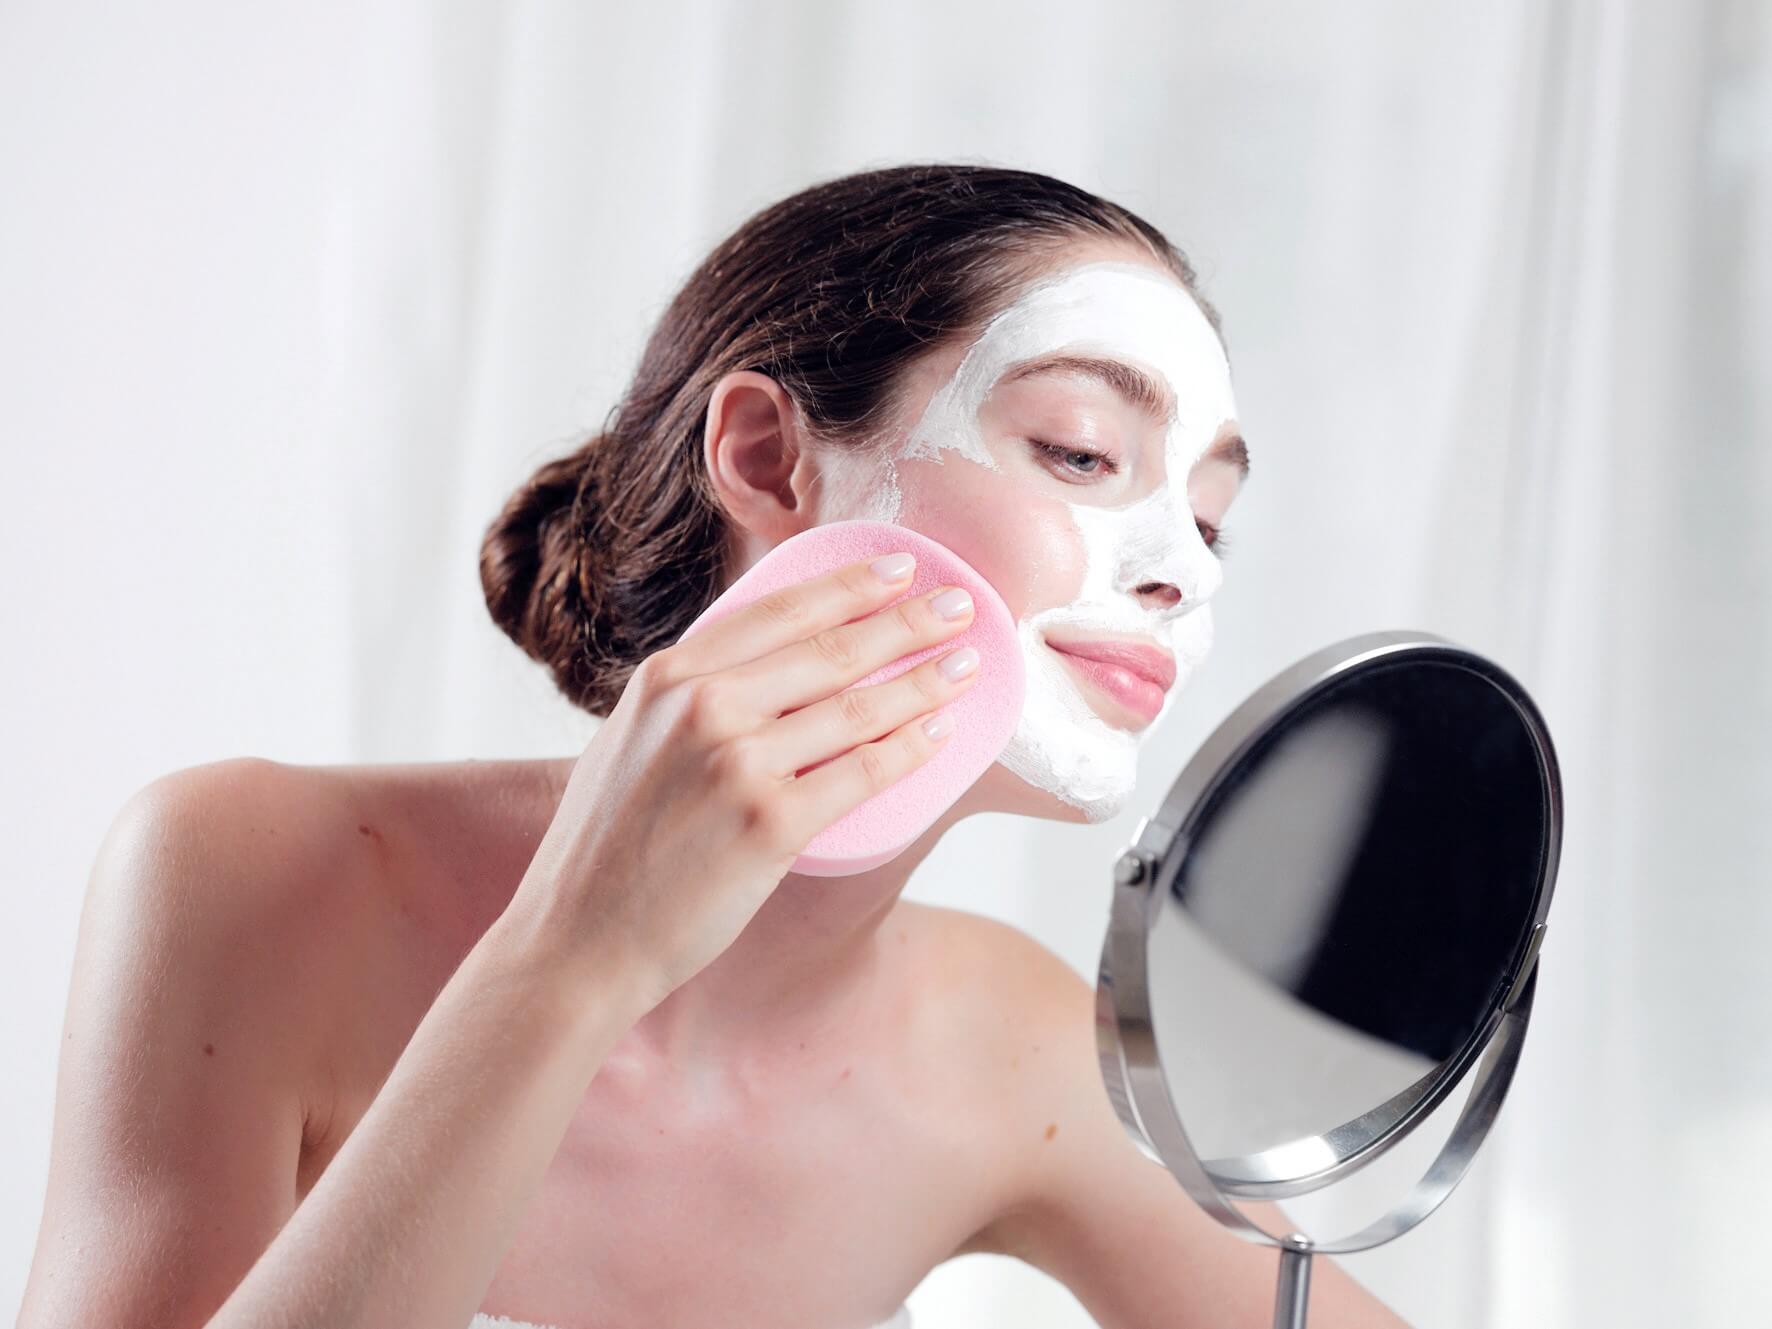 Face beauty is maintained by applying face packs